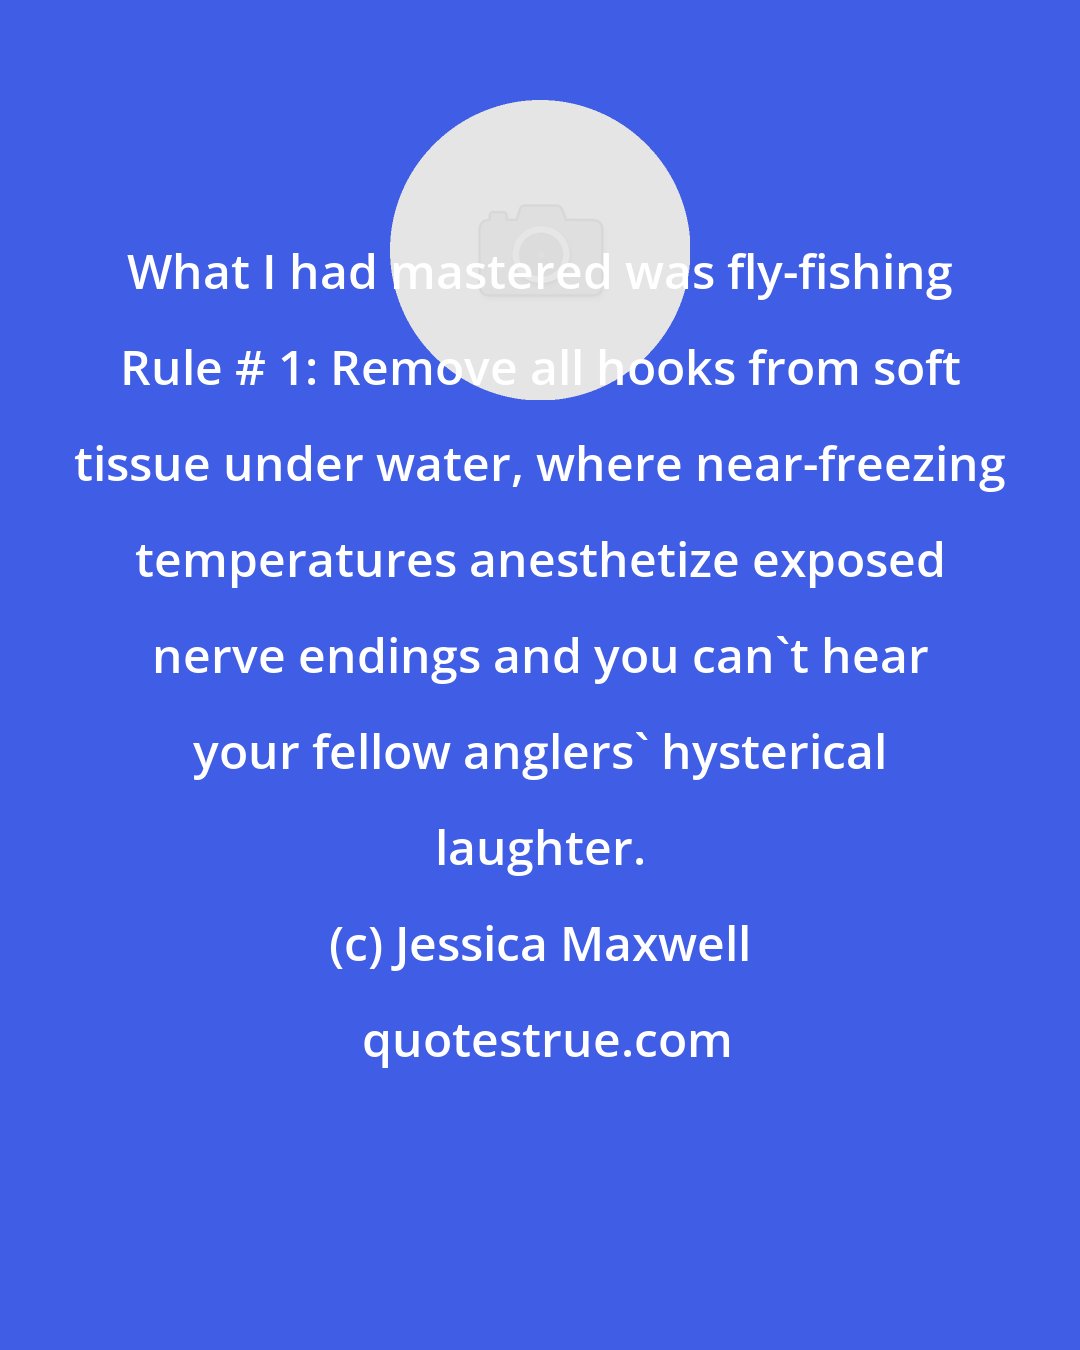 Jessica Maxwell: What I had mastered was fly-fishing Rule # 1: Remove all hooks from soft tissue under water, where near-freezing temperatures anesthetize exposed nerve endings and you can't hear your fellow anglers' hysterical laughter.